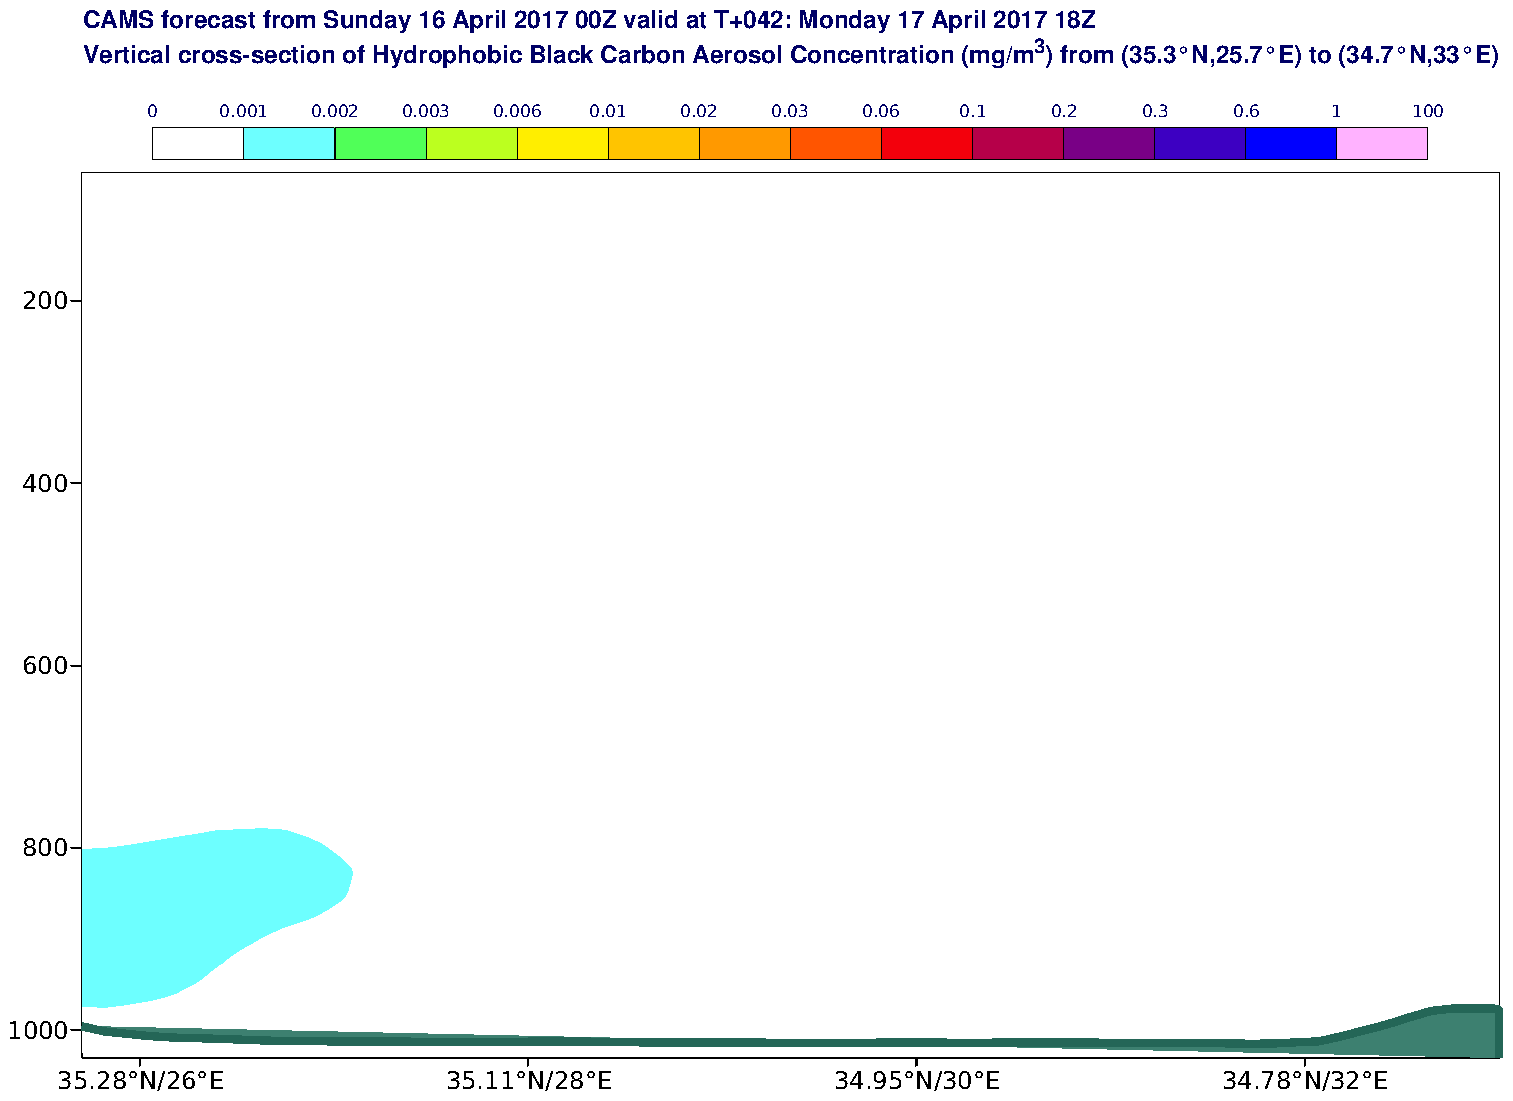 Vertical cross-section of Hydrophobic Black Carbon Aerosol Concentration (mg/m3) valid at T42 - 2017-04-17 18:00